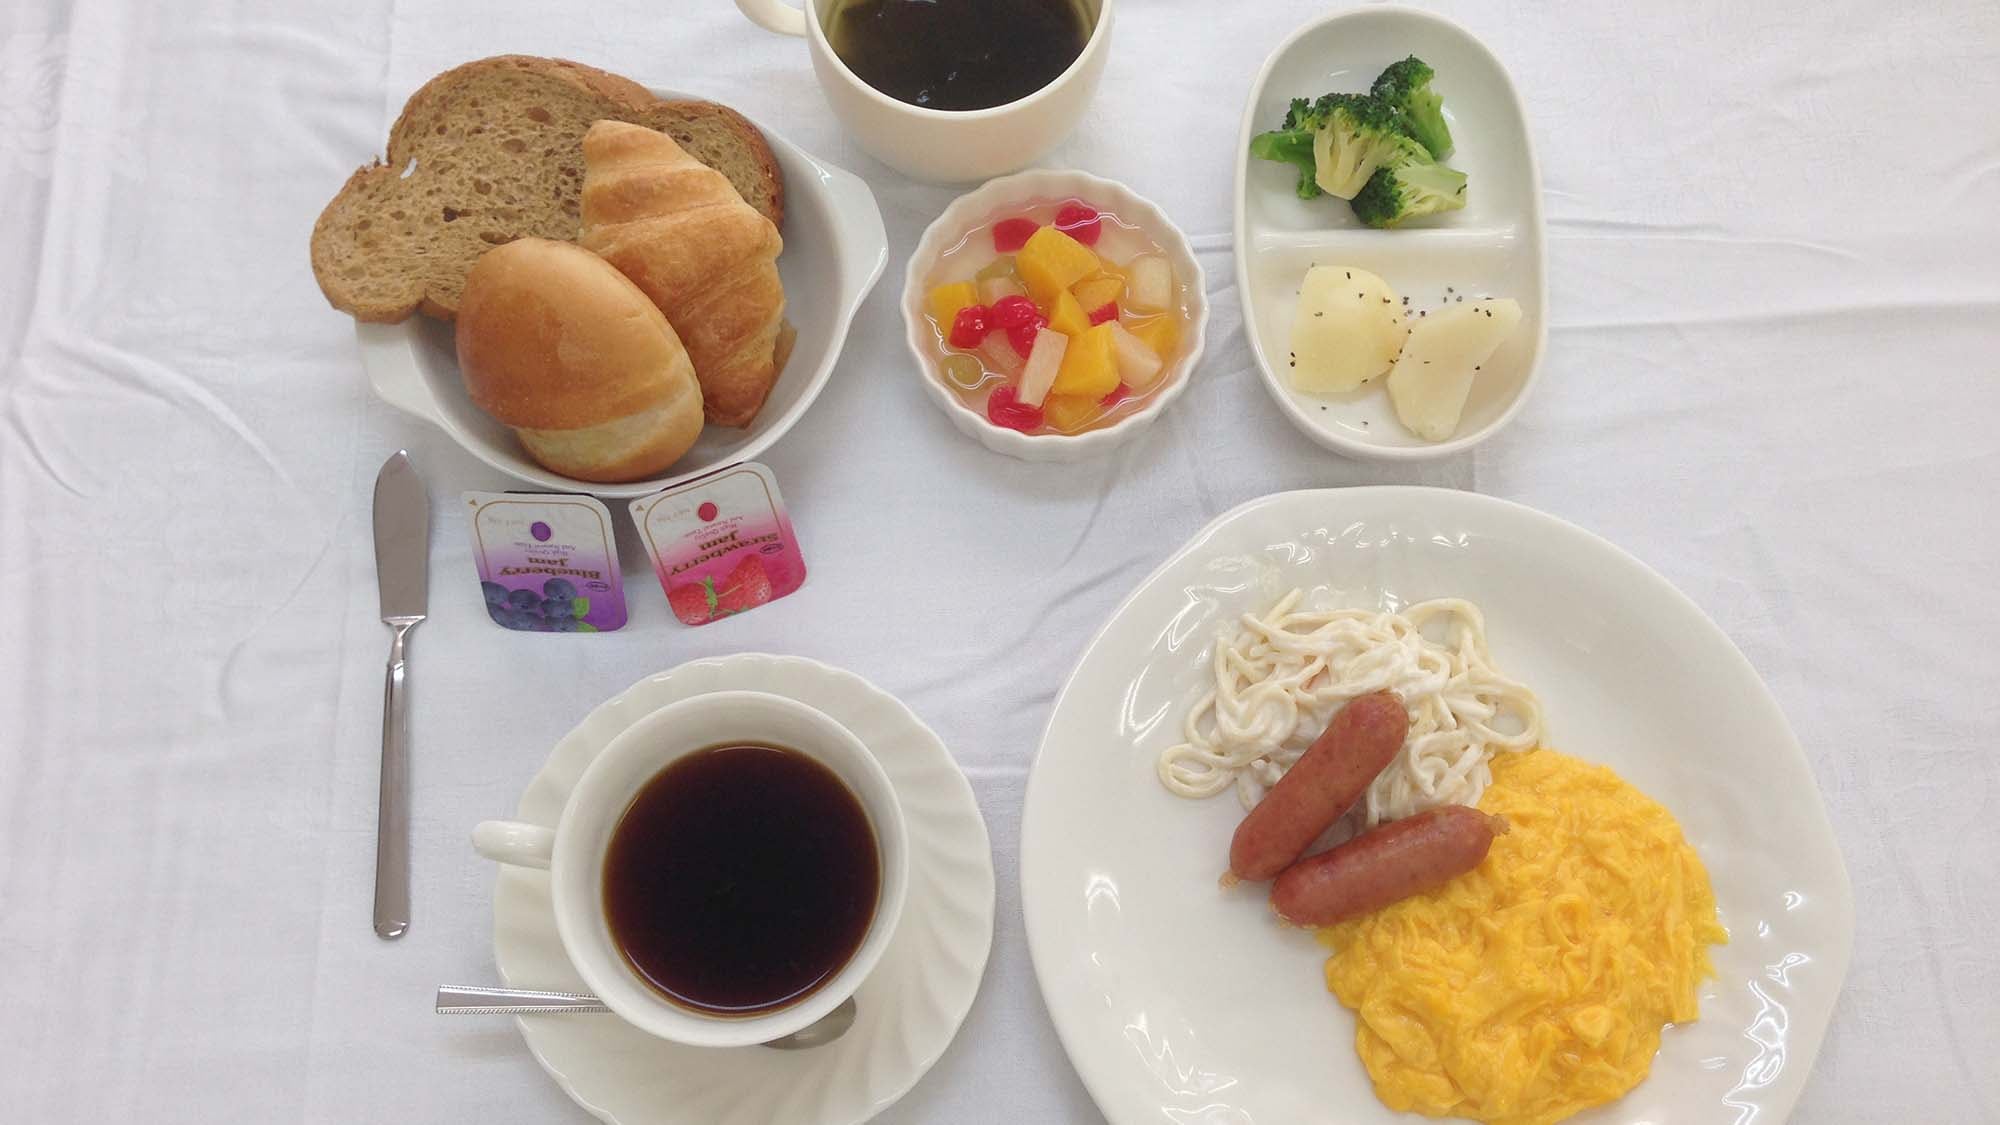 ・ Breakfast is currently served in a served style rather than a buffet.